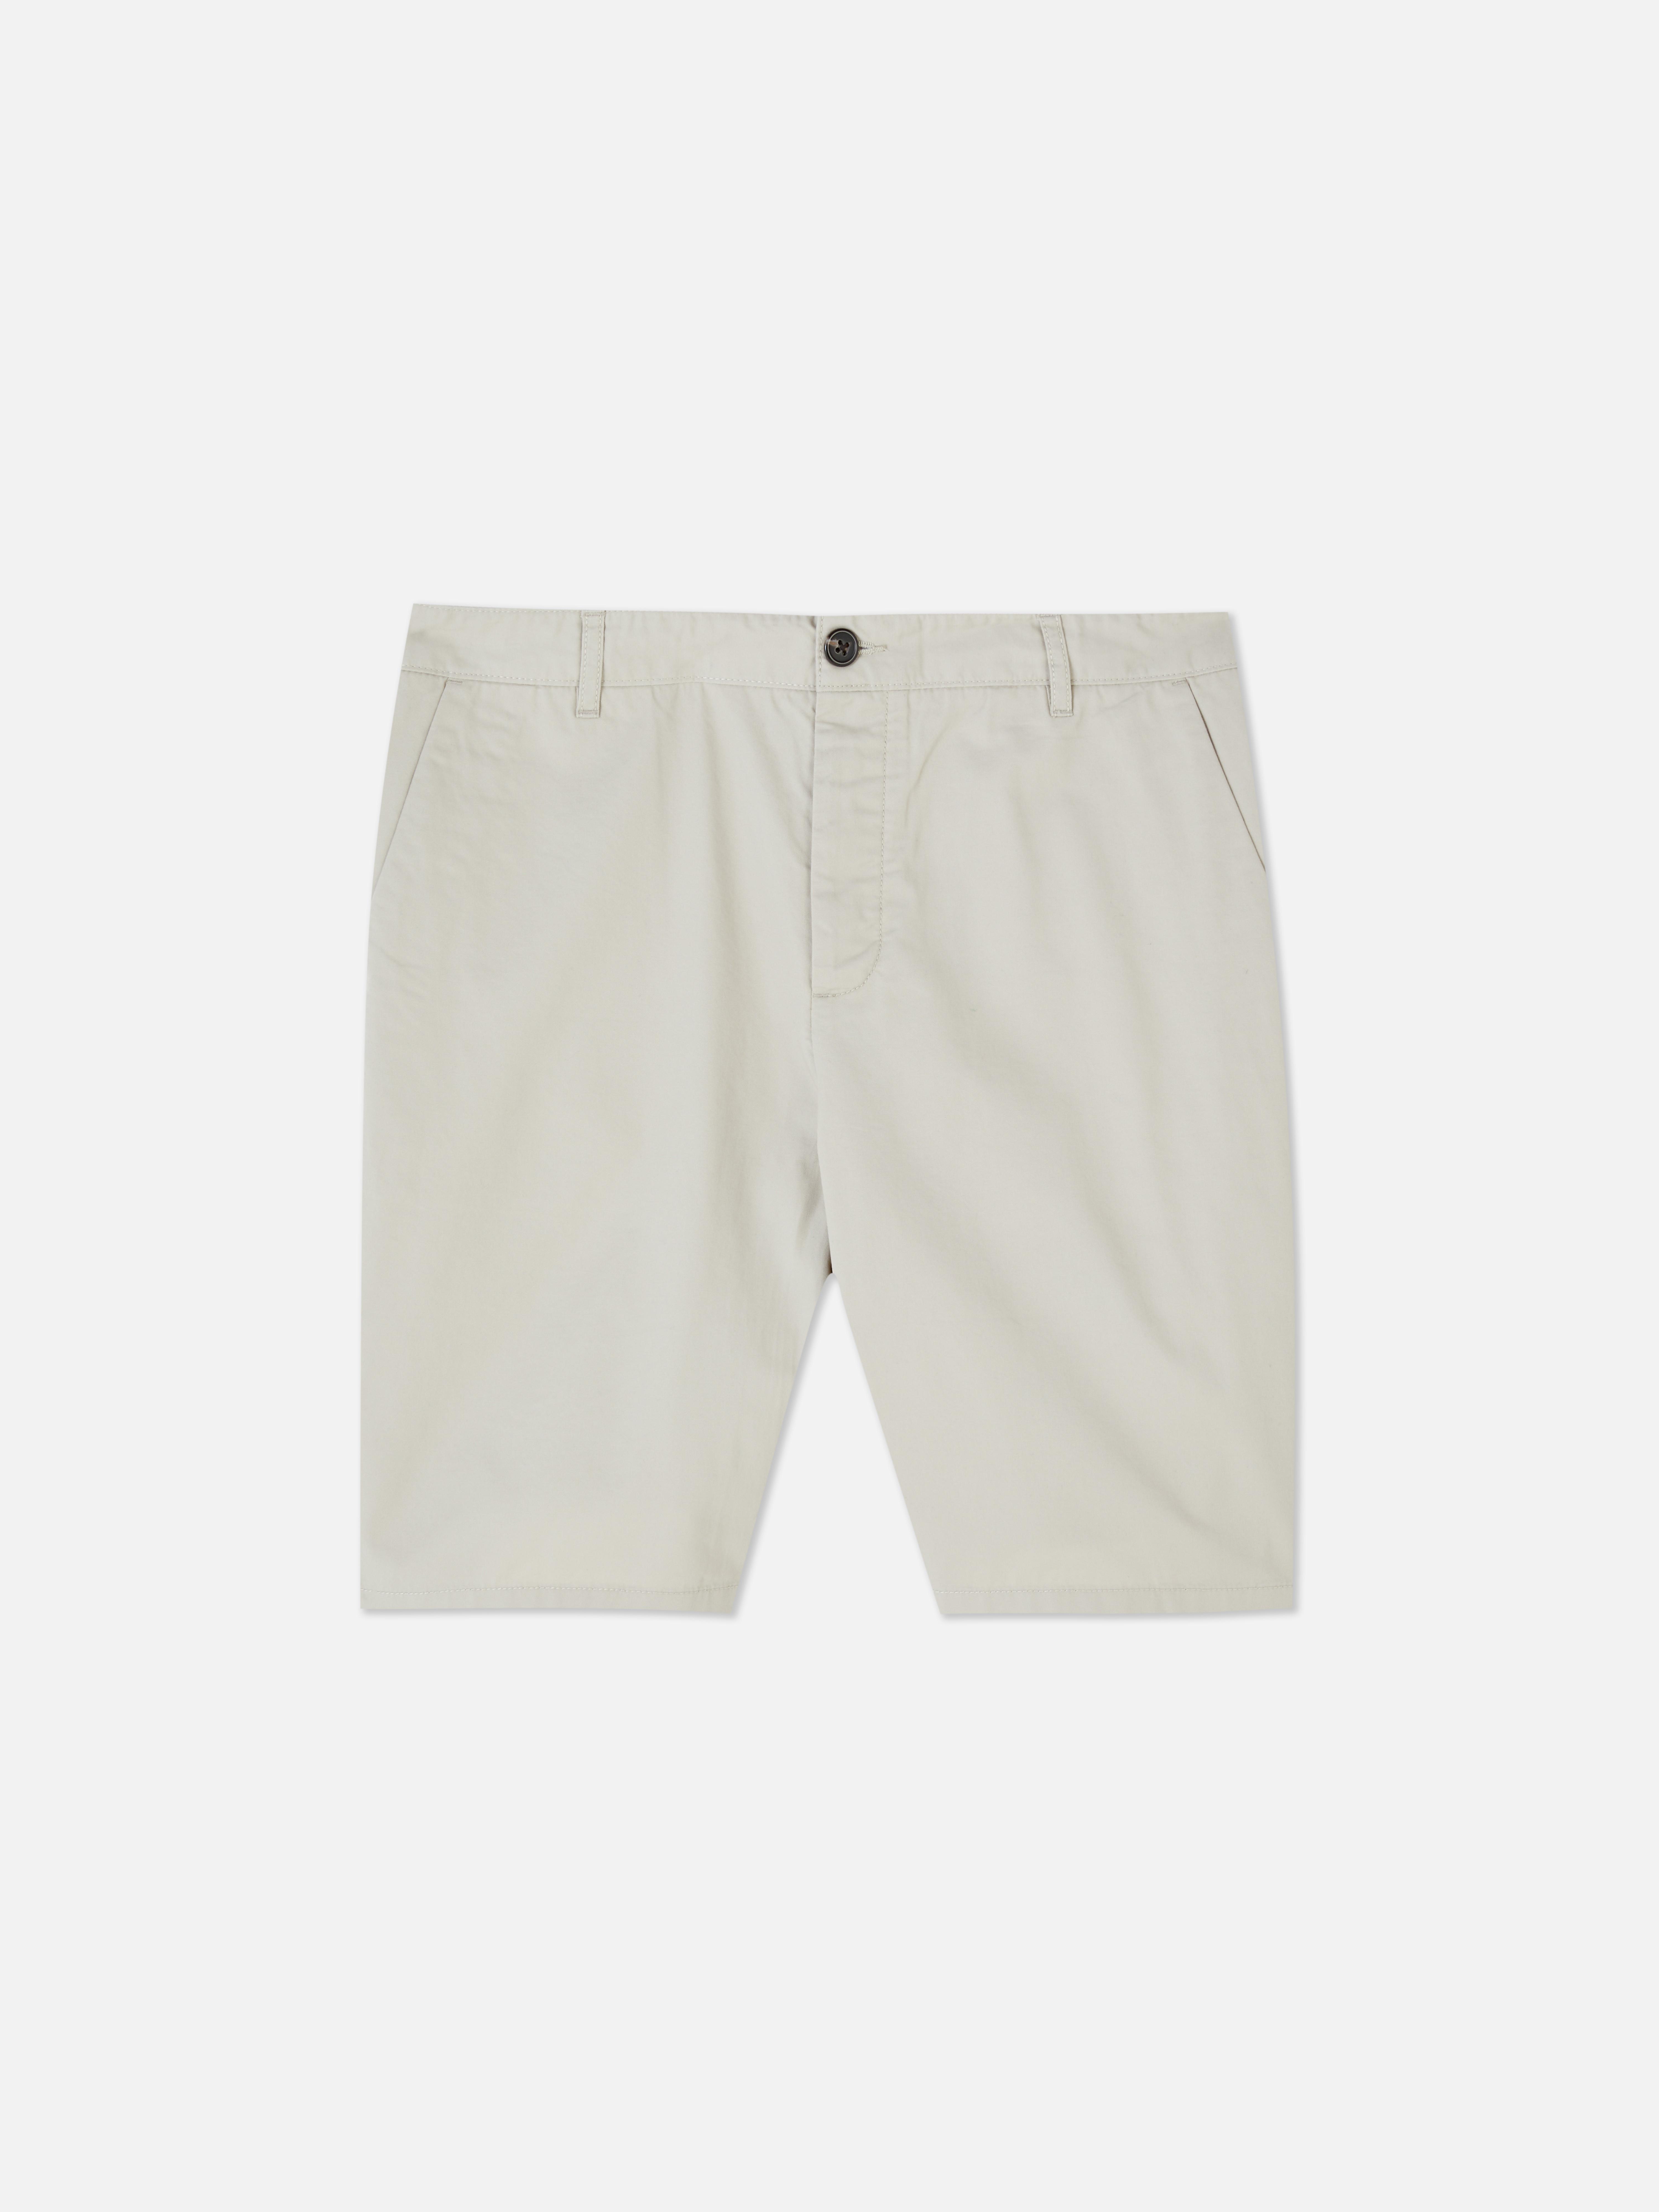 Cotton Chino Shorts | Men's Shorts | Men's Style | Our Menswear ...